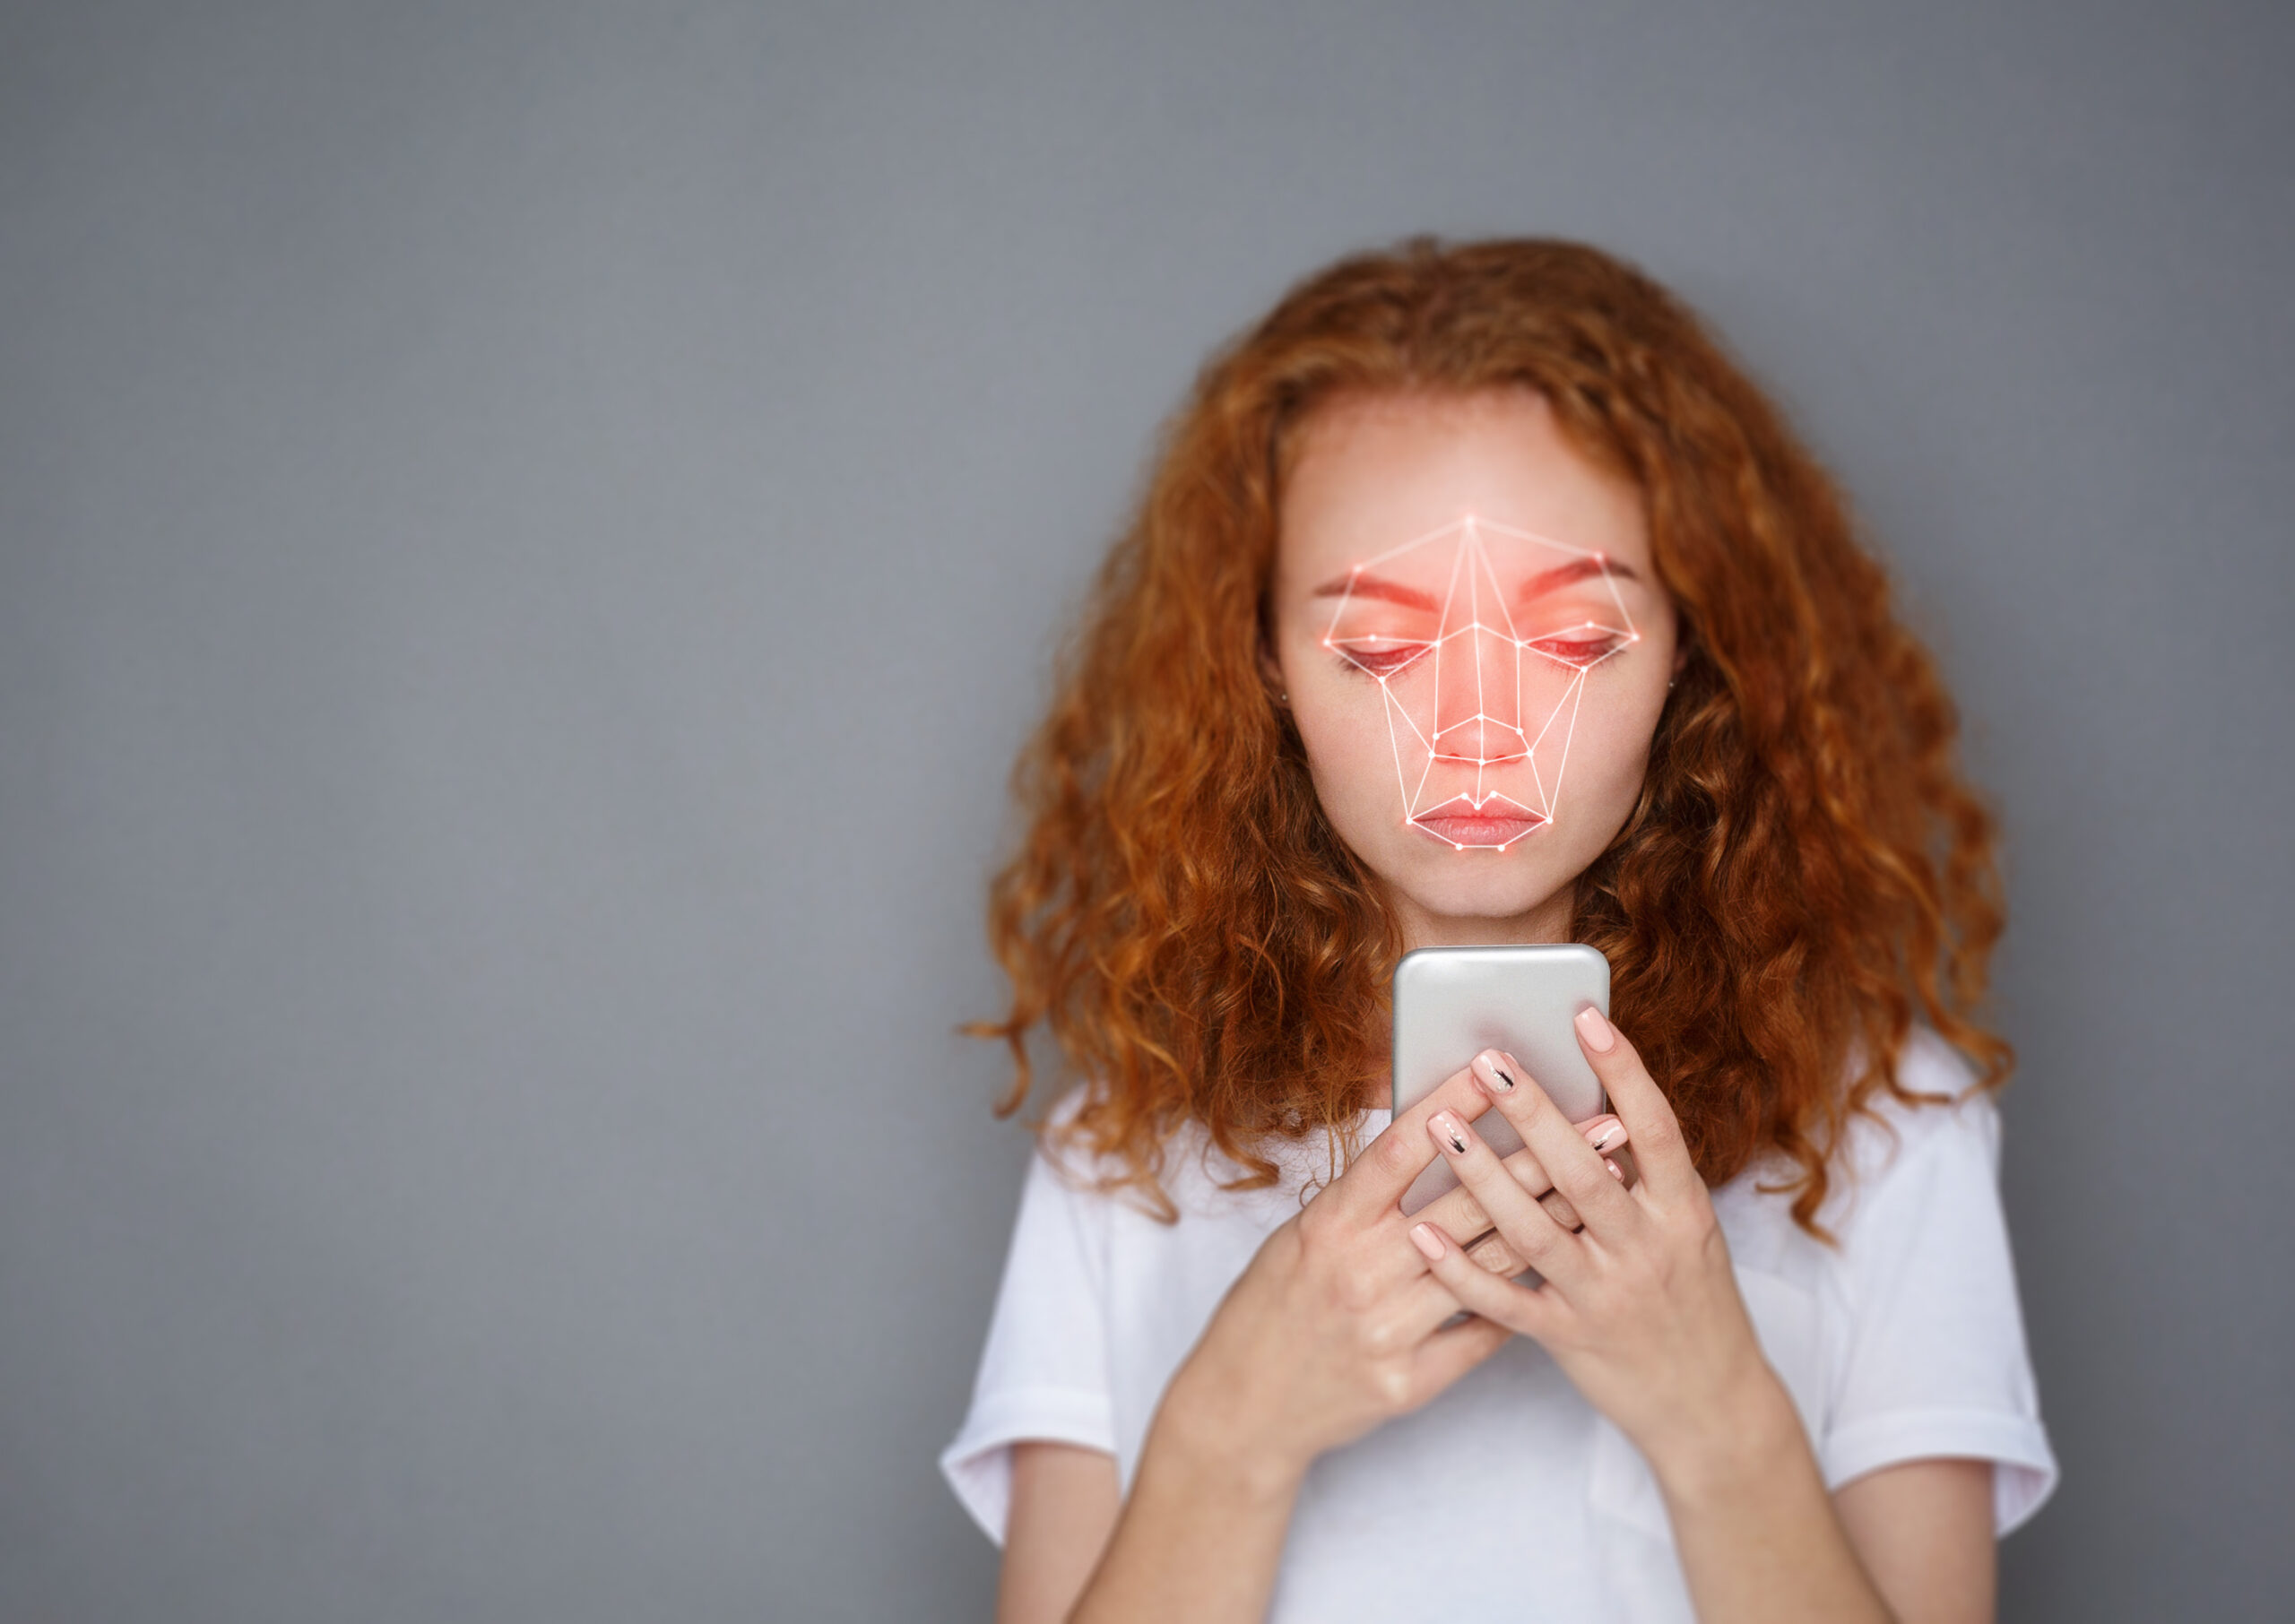 Young woman holding her phone in front of her face against a grey background. There is a red, face-scanning laser grid on her face.